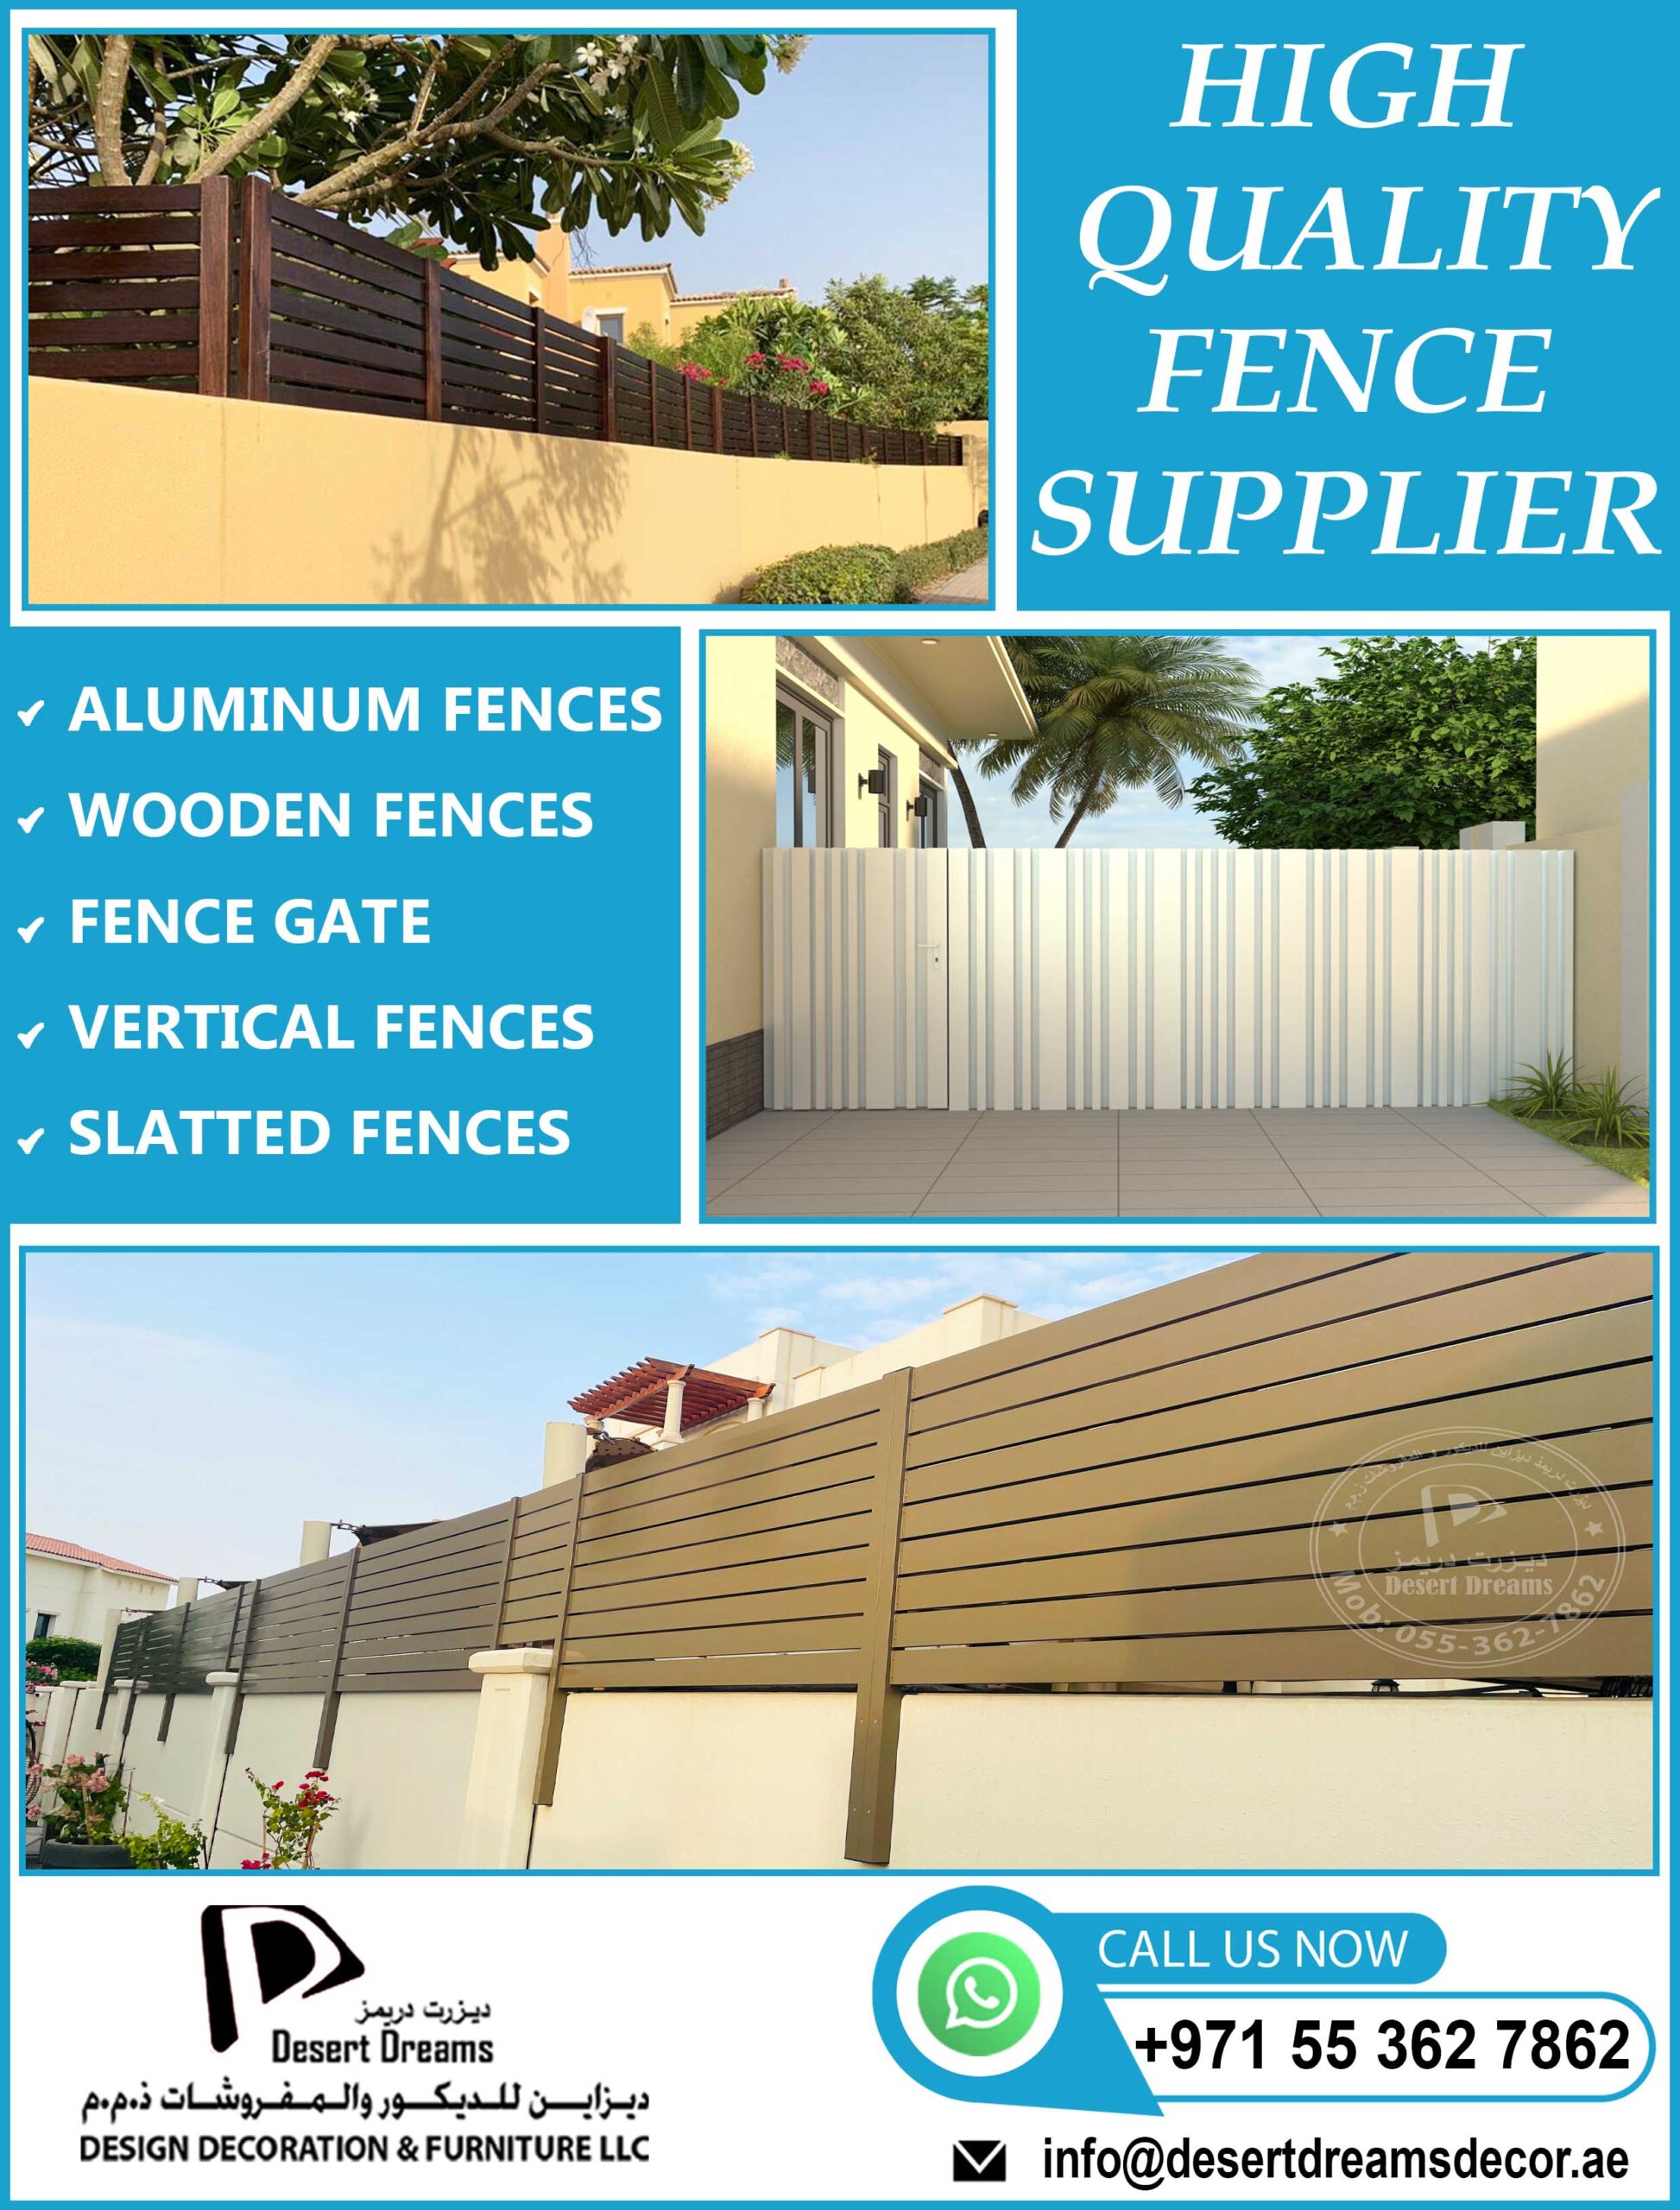 Wooden Fence and Aluminum Fences in Uae.jpg